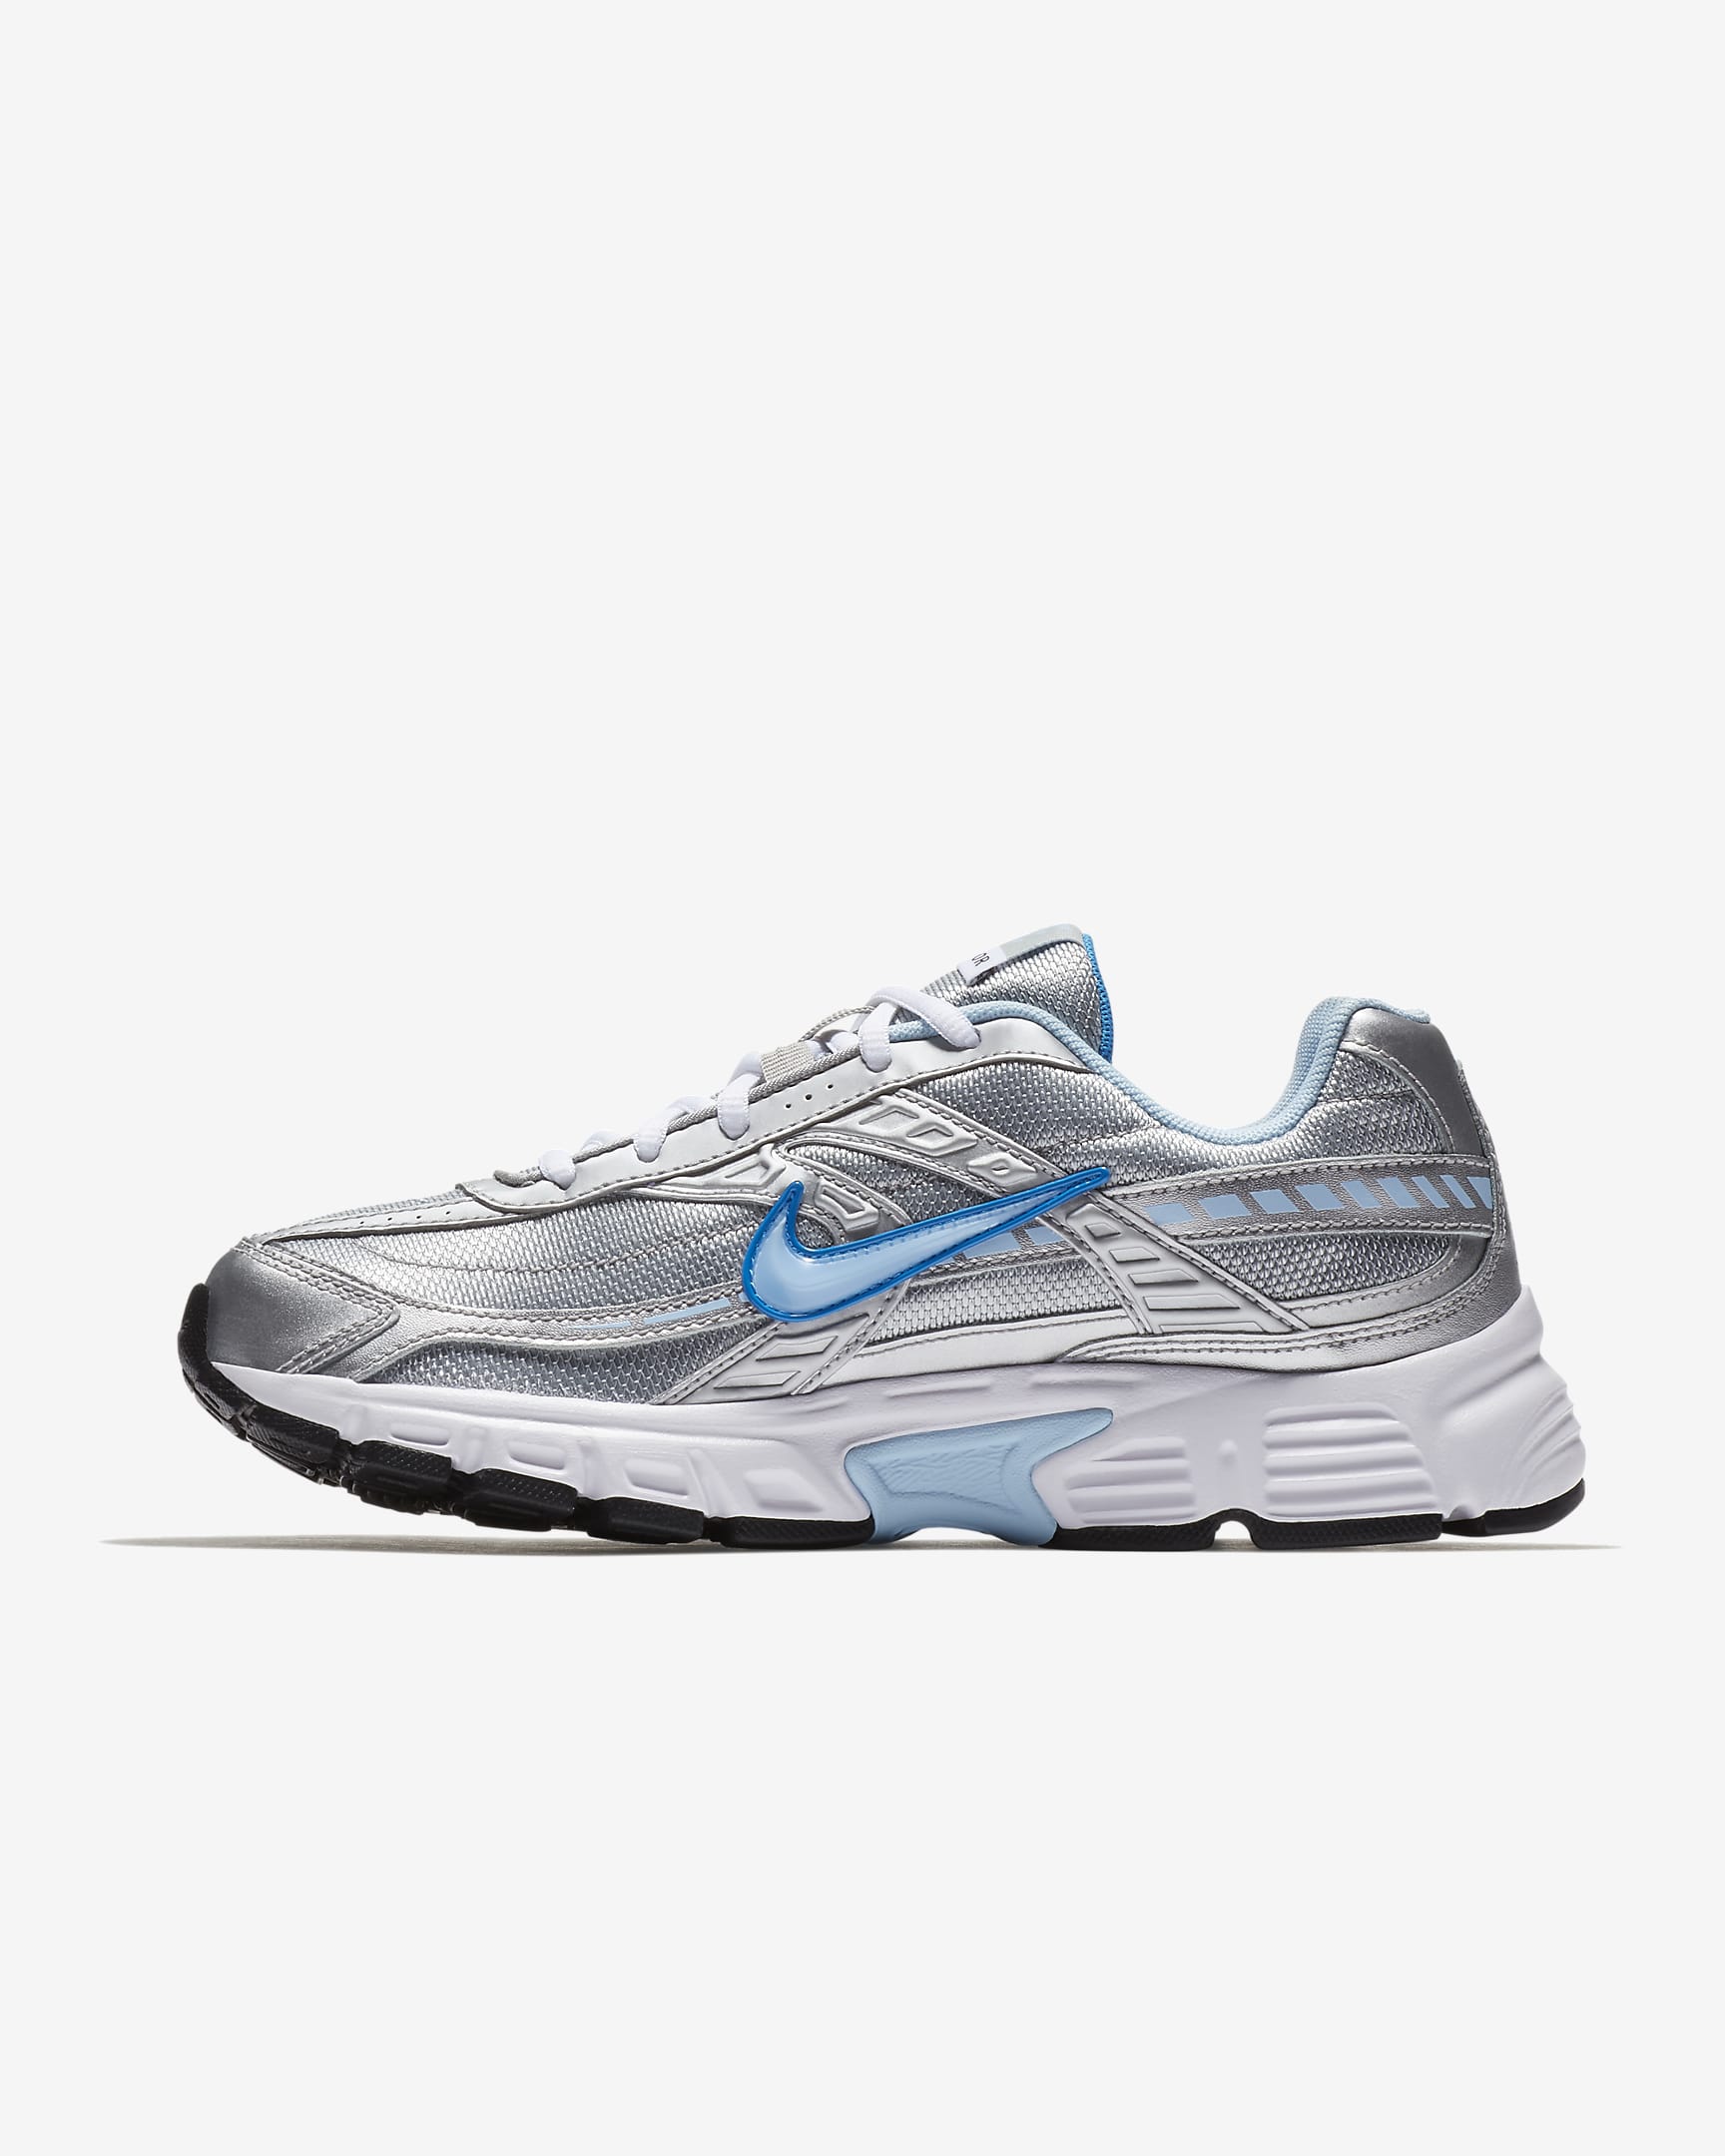 Chaussure Nike Initiator pour femme - Metallic Silver/Blanc/Cool Grey/Ice Blue